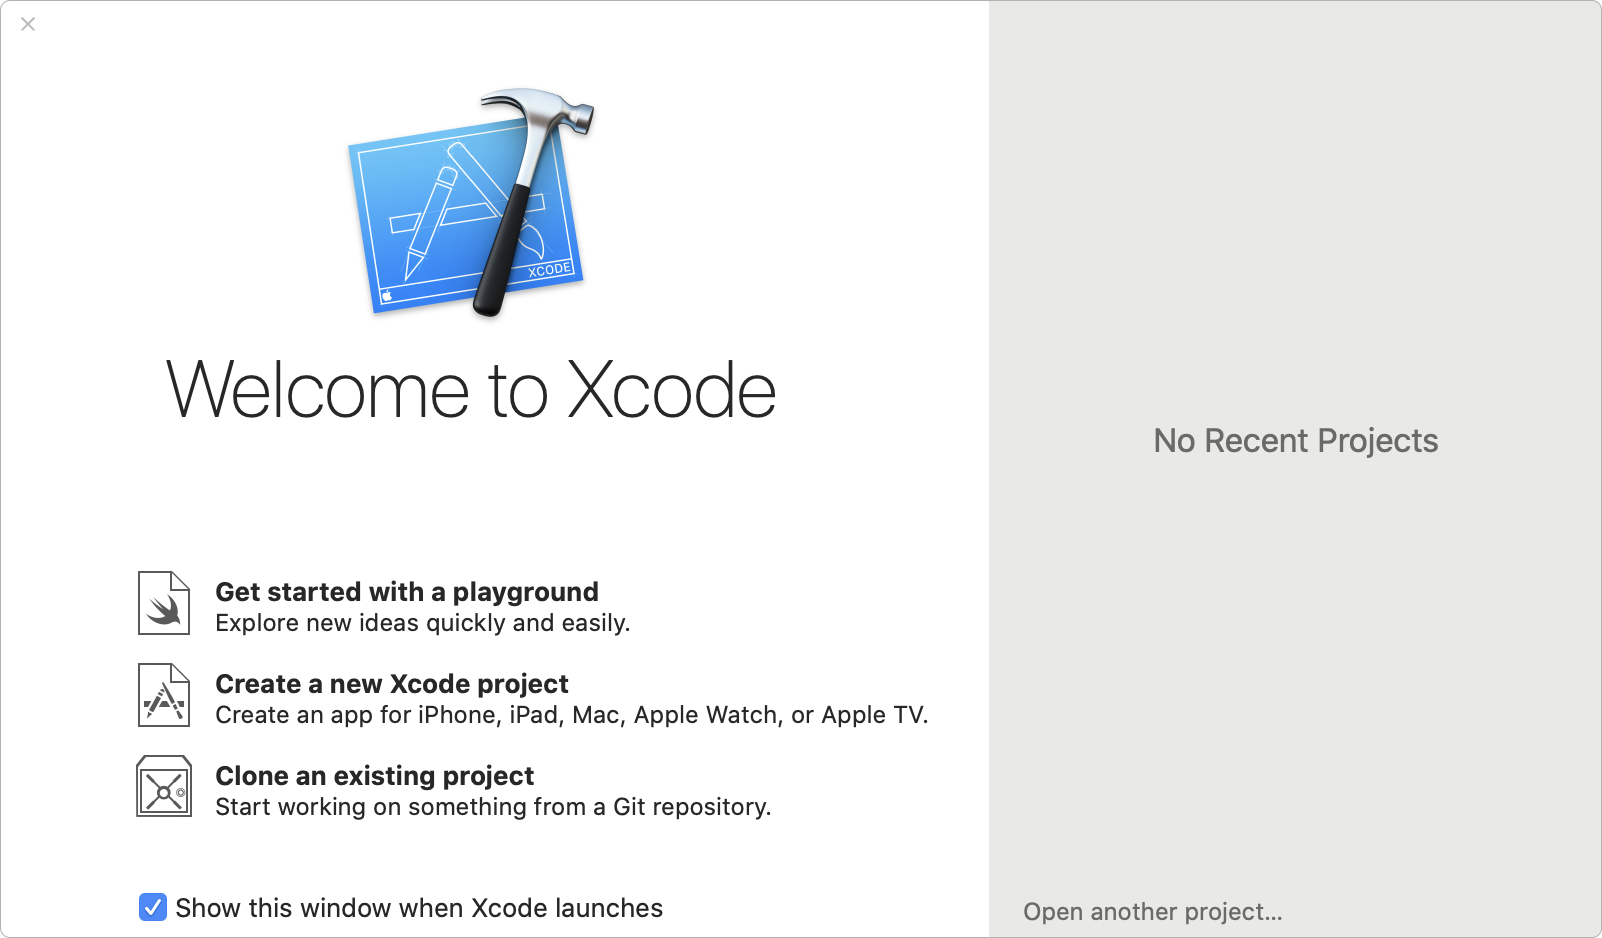 The Xcode splash screen highlighting features such as get started with a playground, create a new Xcode project, and clone an existing project.